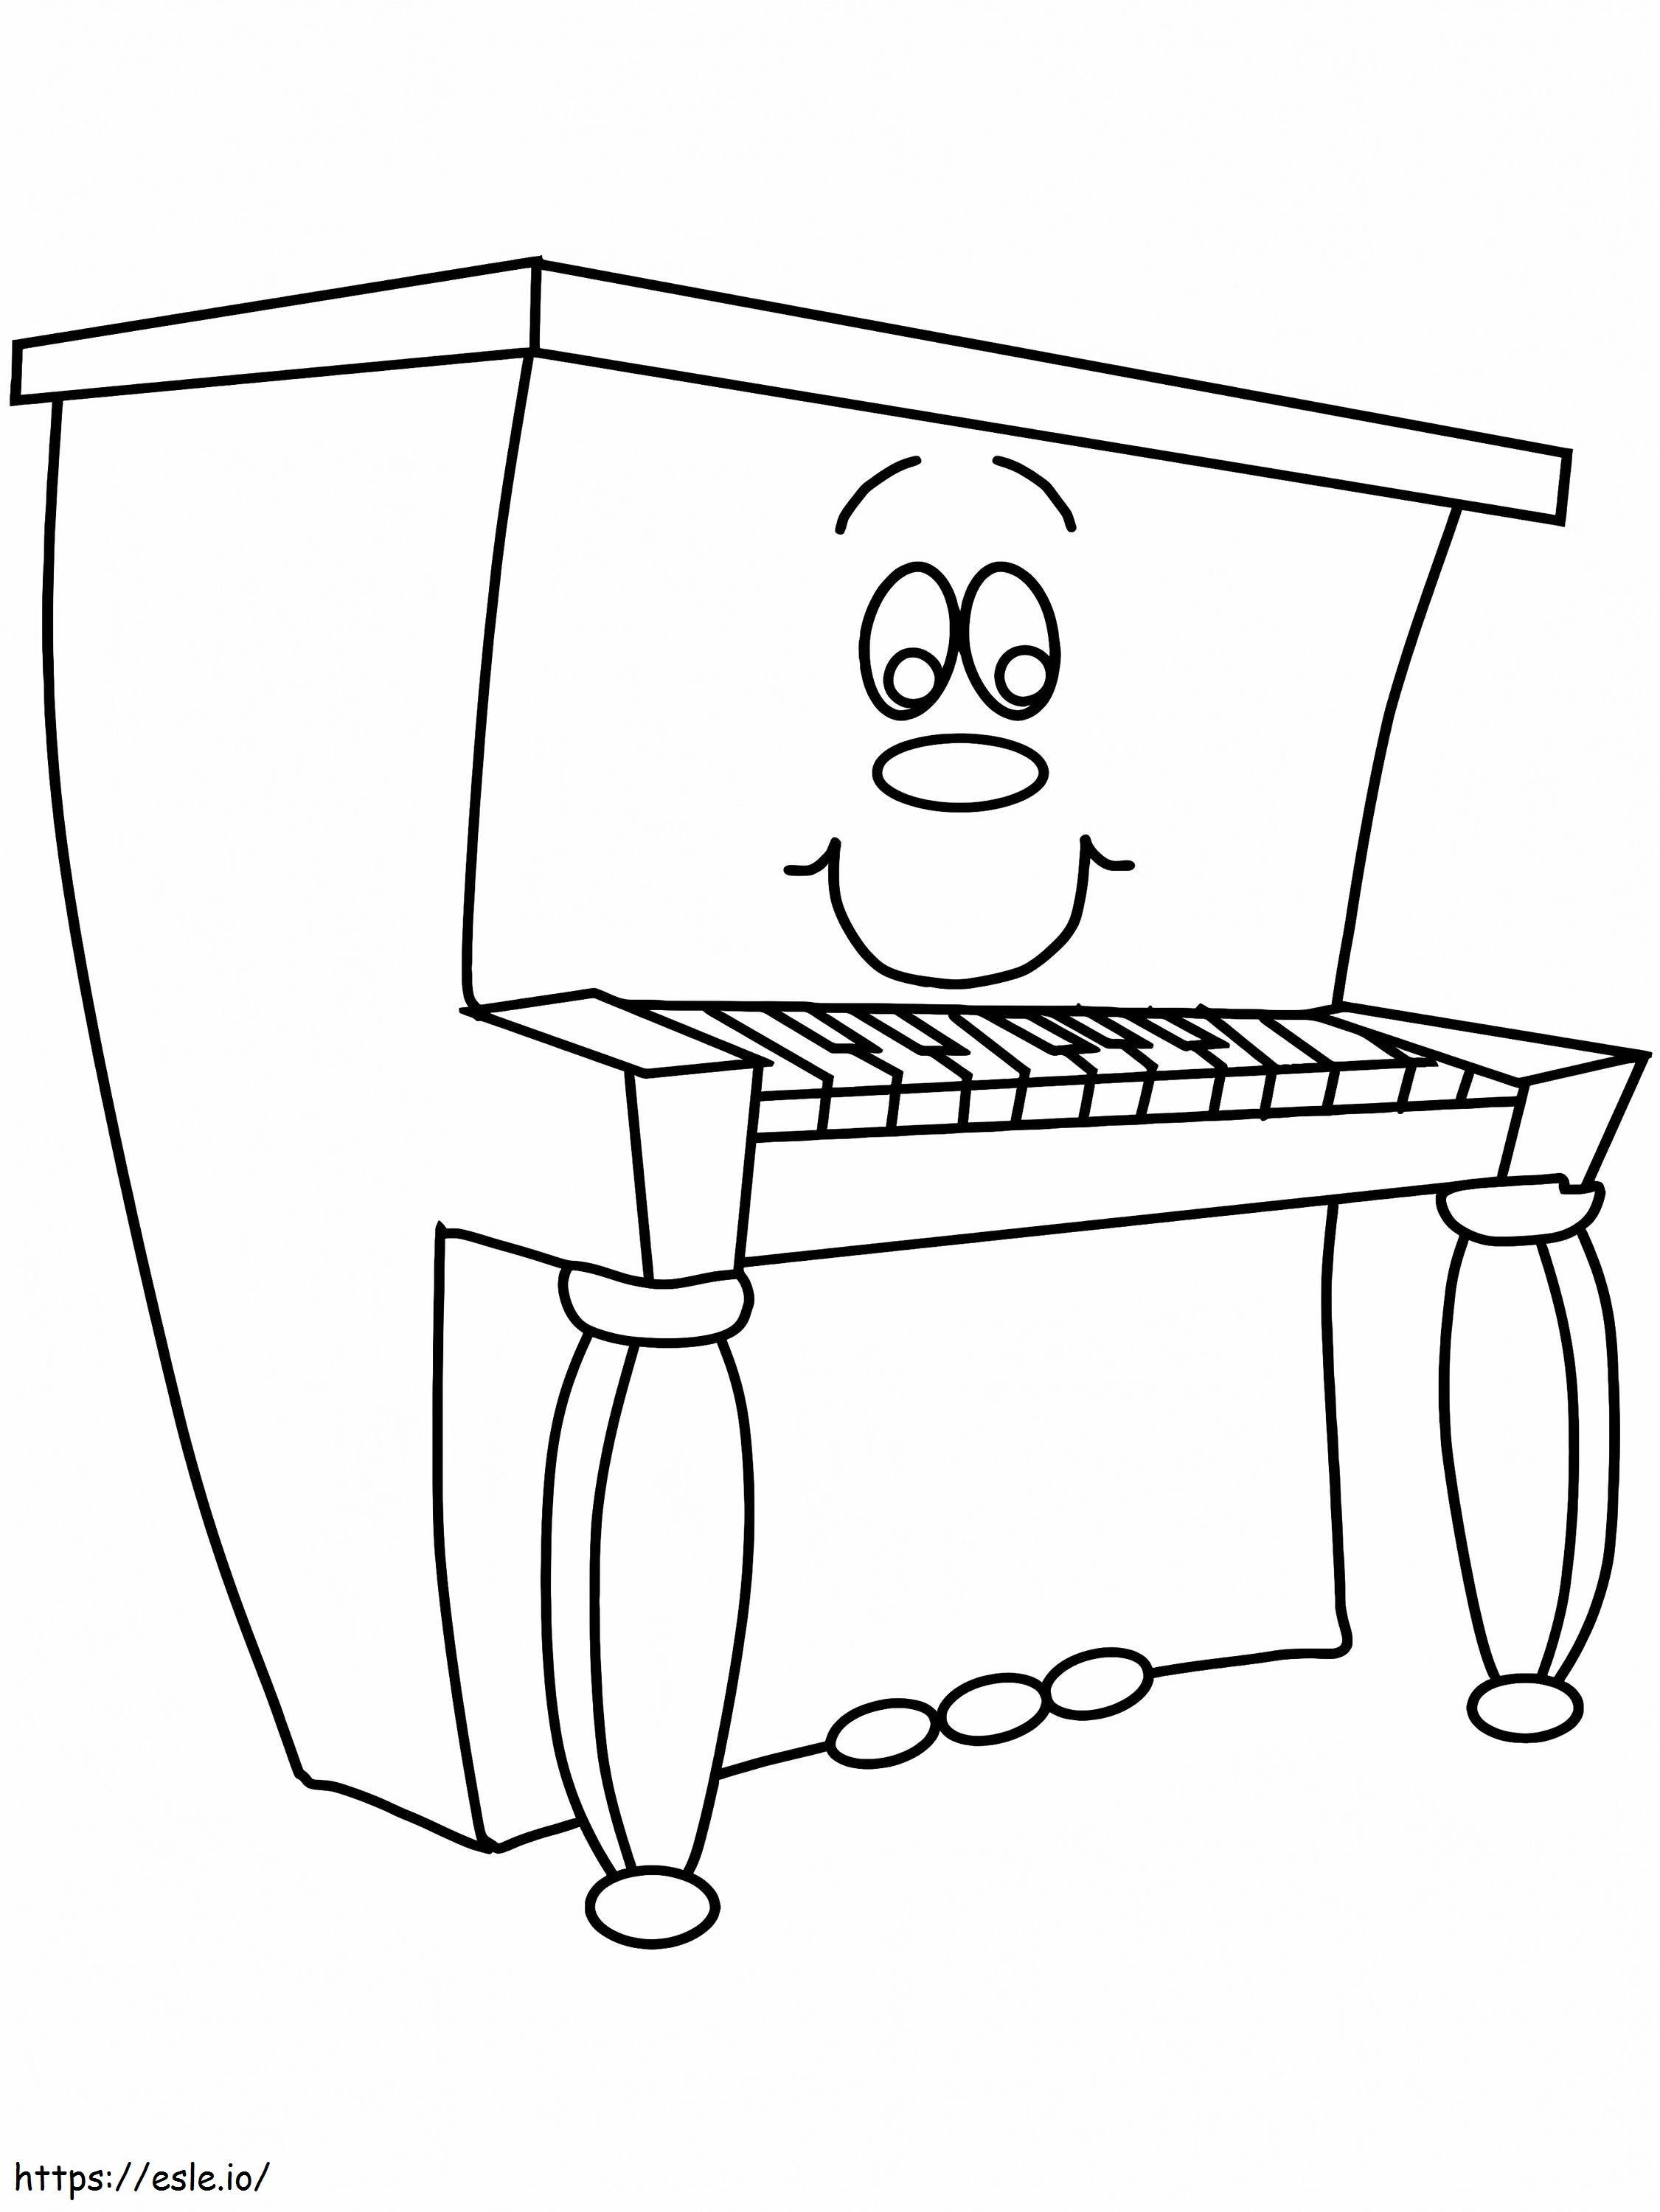 1539402506 Piano Music coloring page